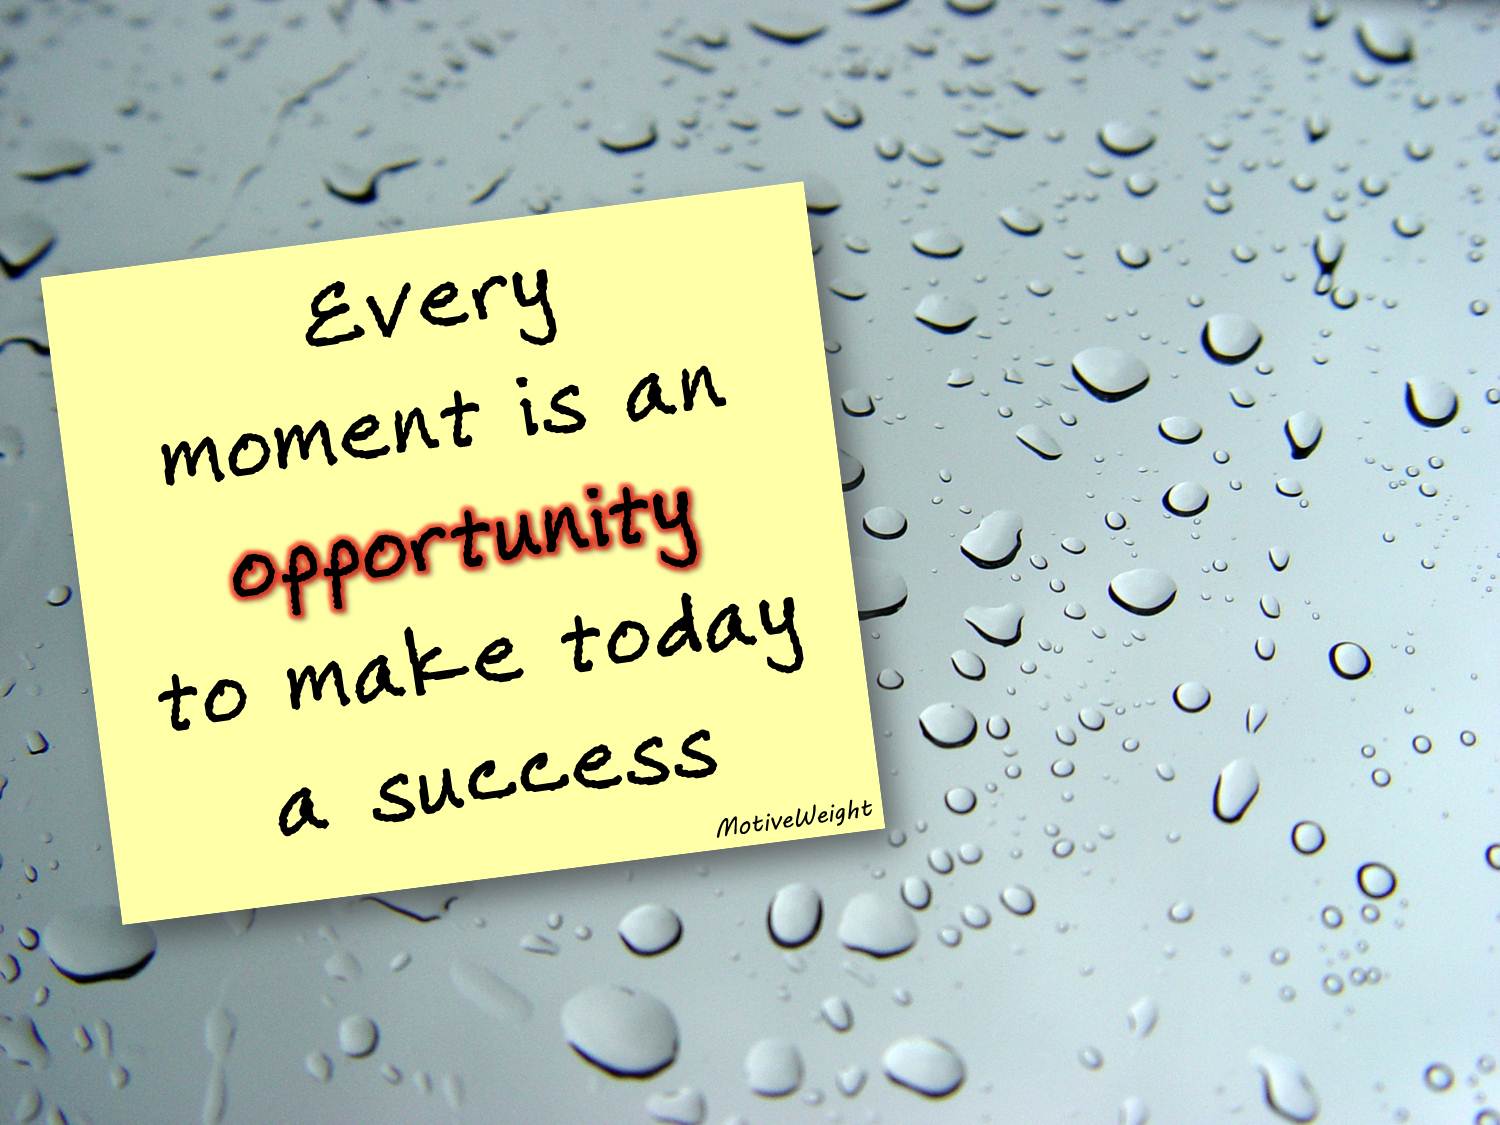 One moment. Every moment Soil. Make today amazing.